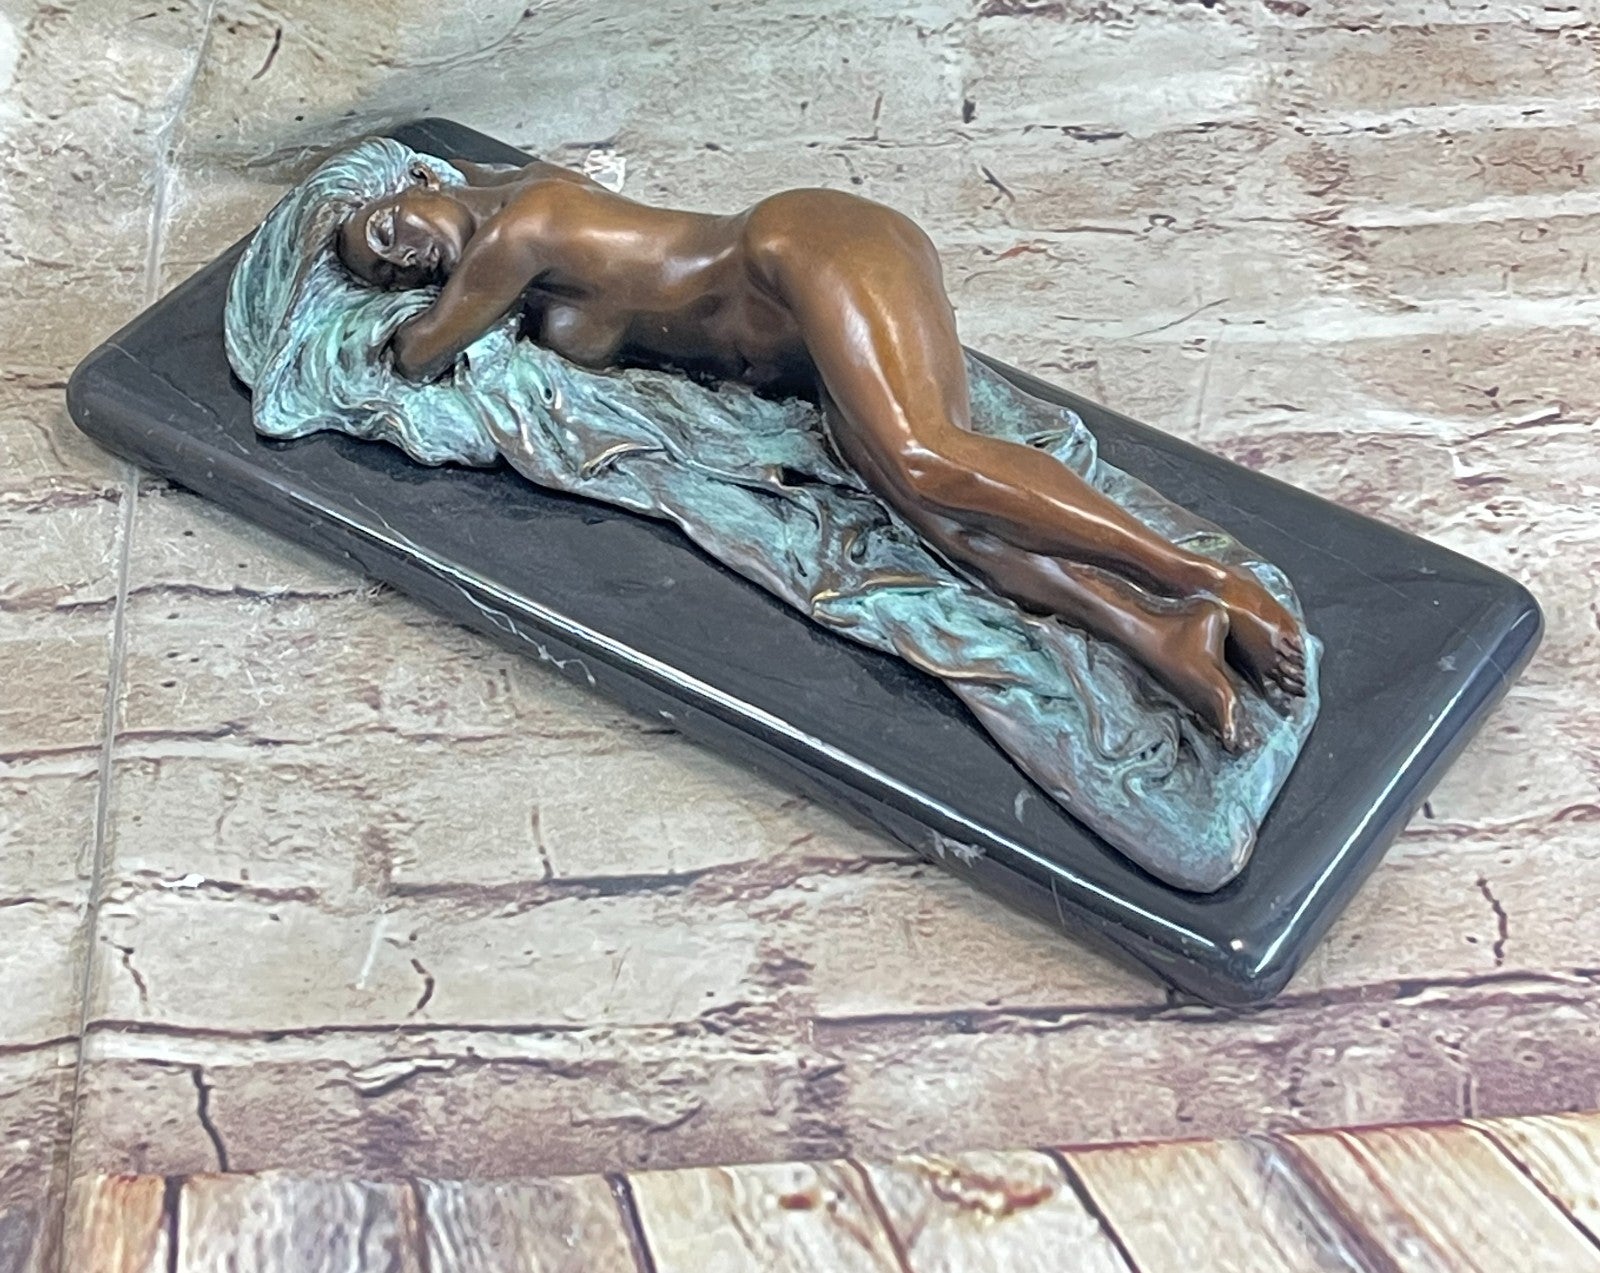 Sexy Girl Naked Hot Women Beautiful Lady Image Babe Bronze Sculpture Statue